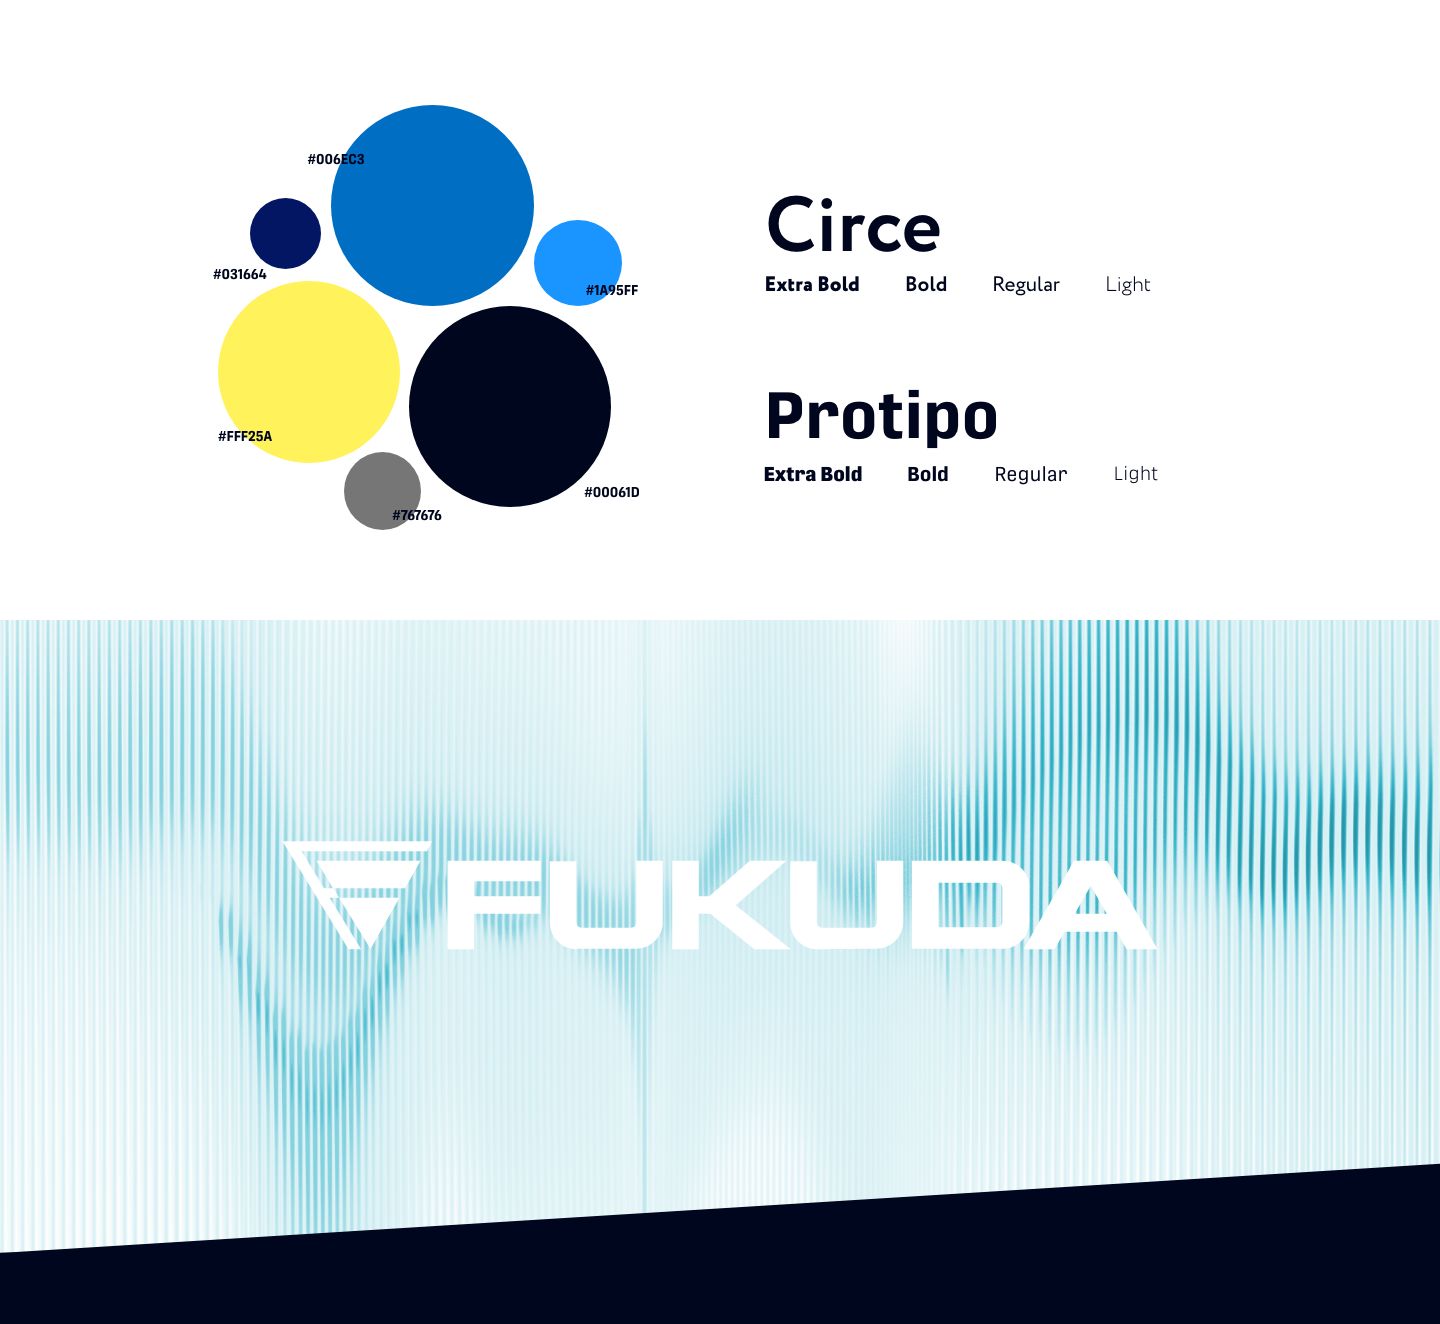 The Fukuda brand colors, typefaces and logo